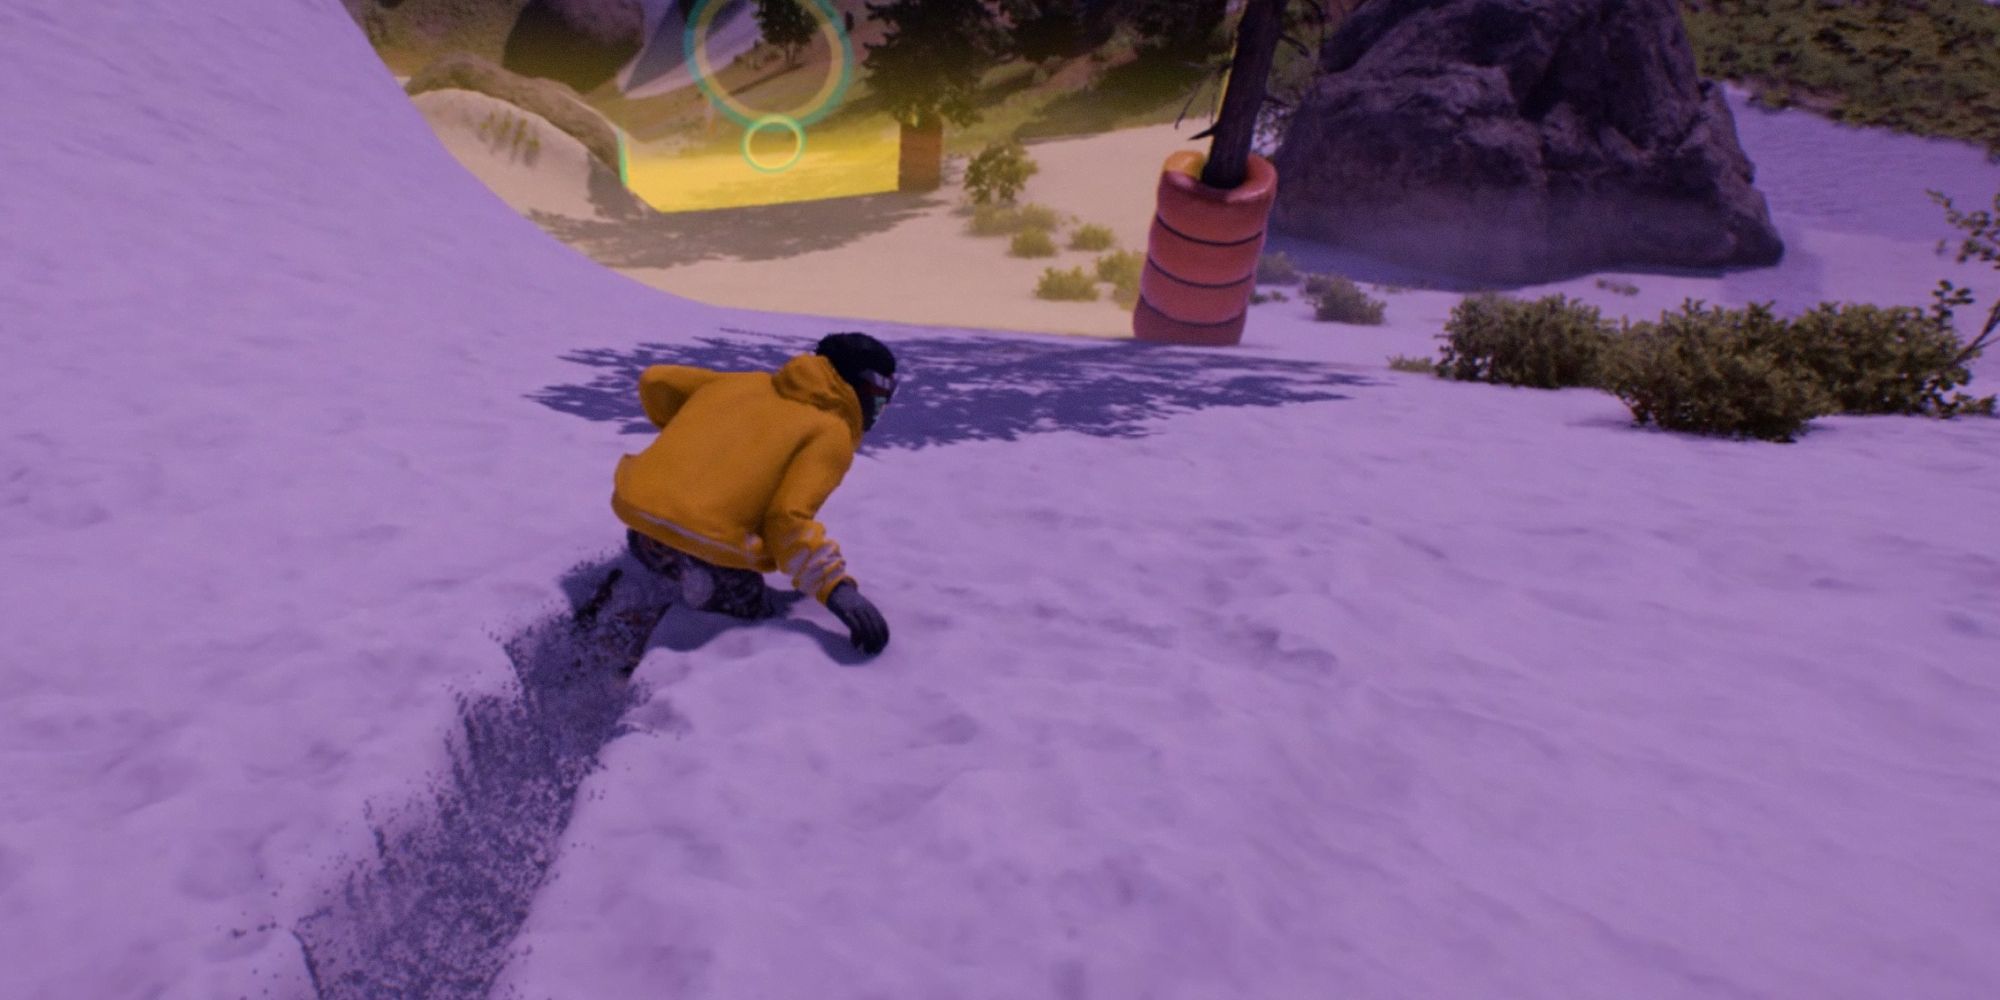 Riders Republic. Snowboarding with purple lighting. Wearing yellow jacket coming up to checkpoint.